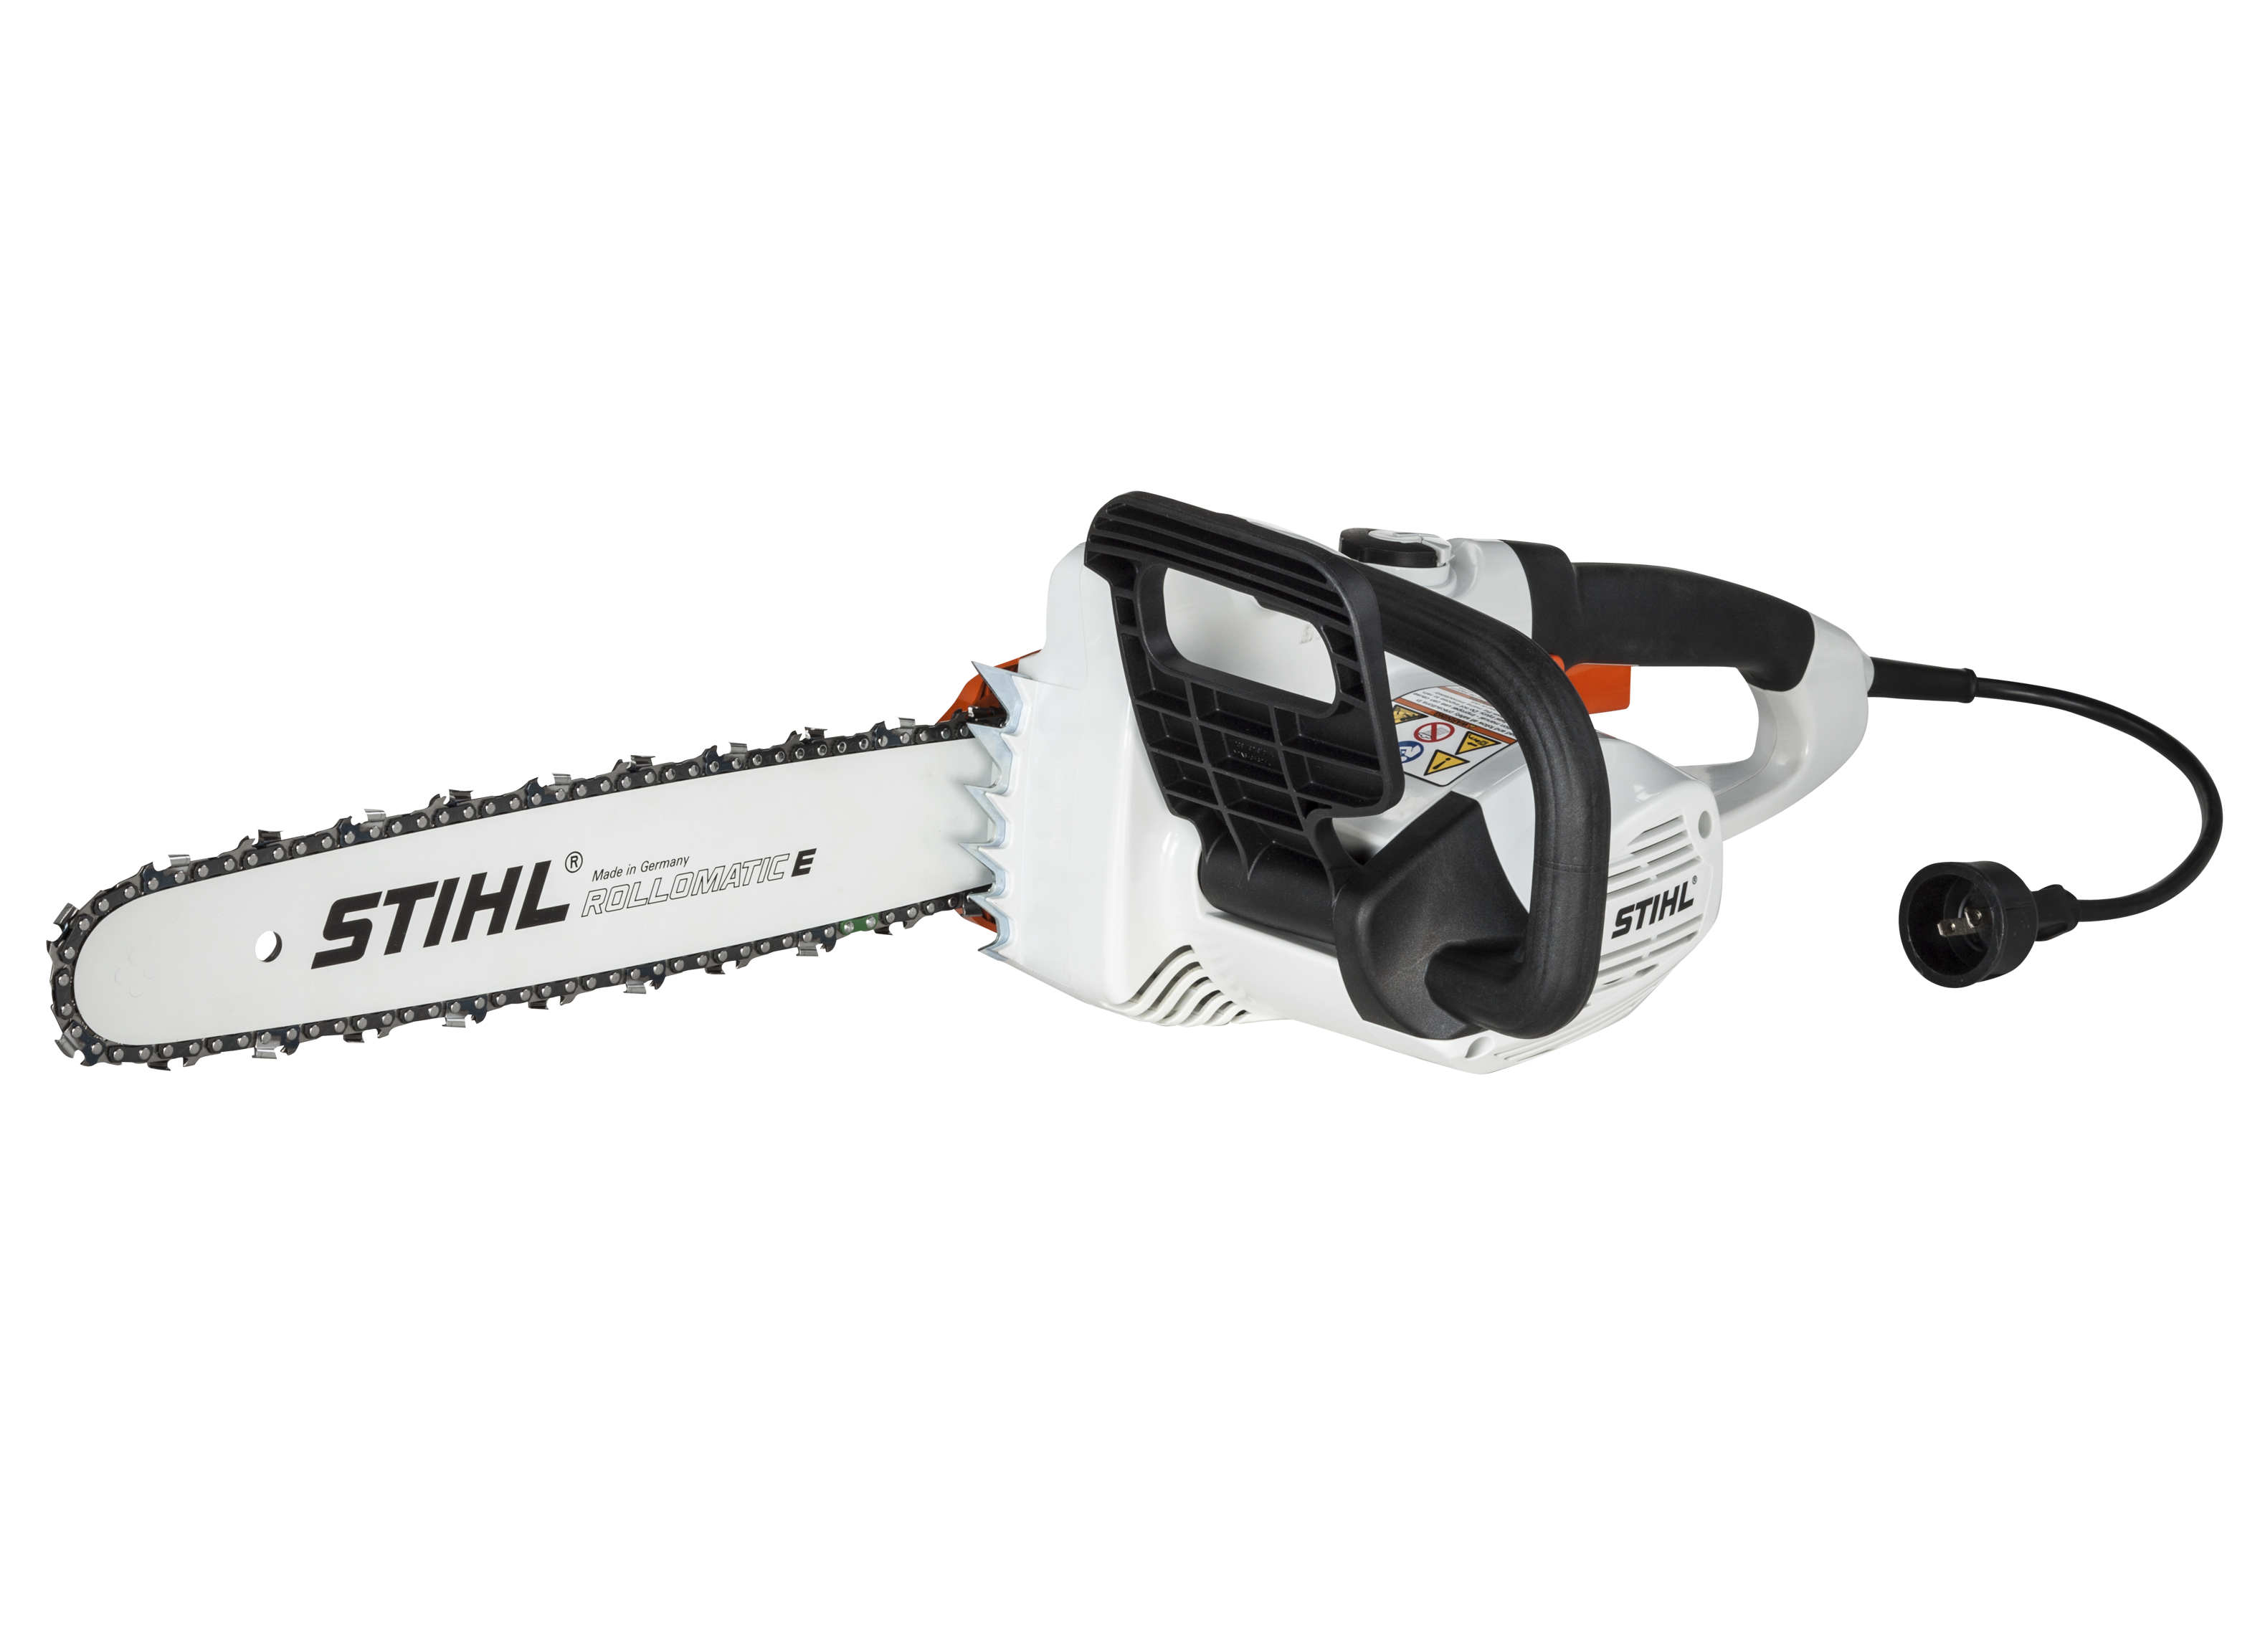 Stihl MS170 review